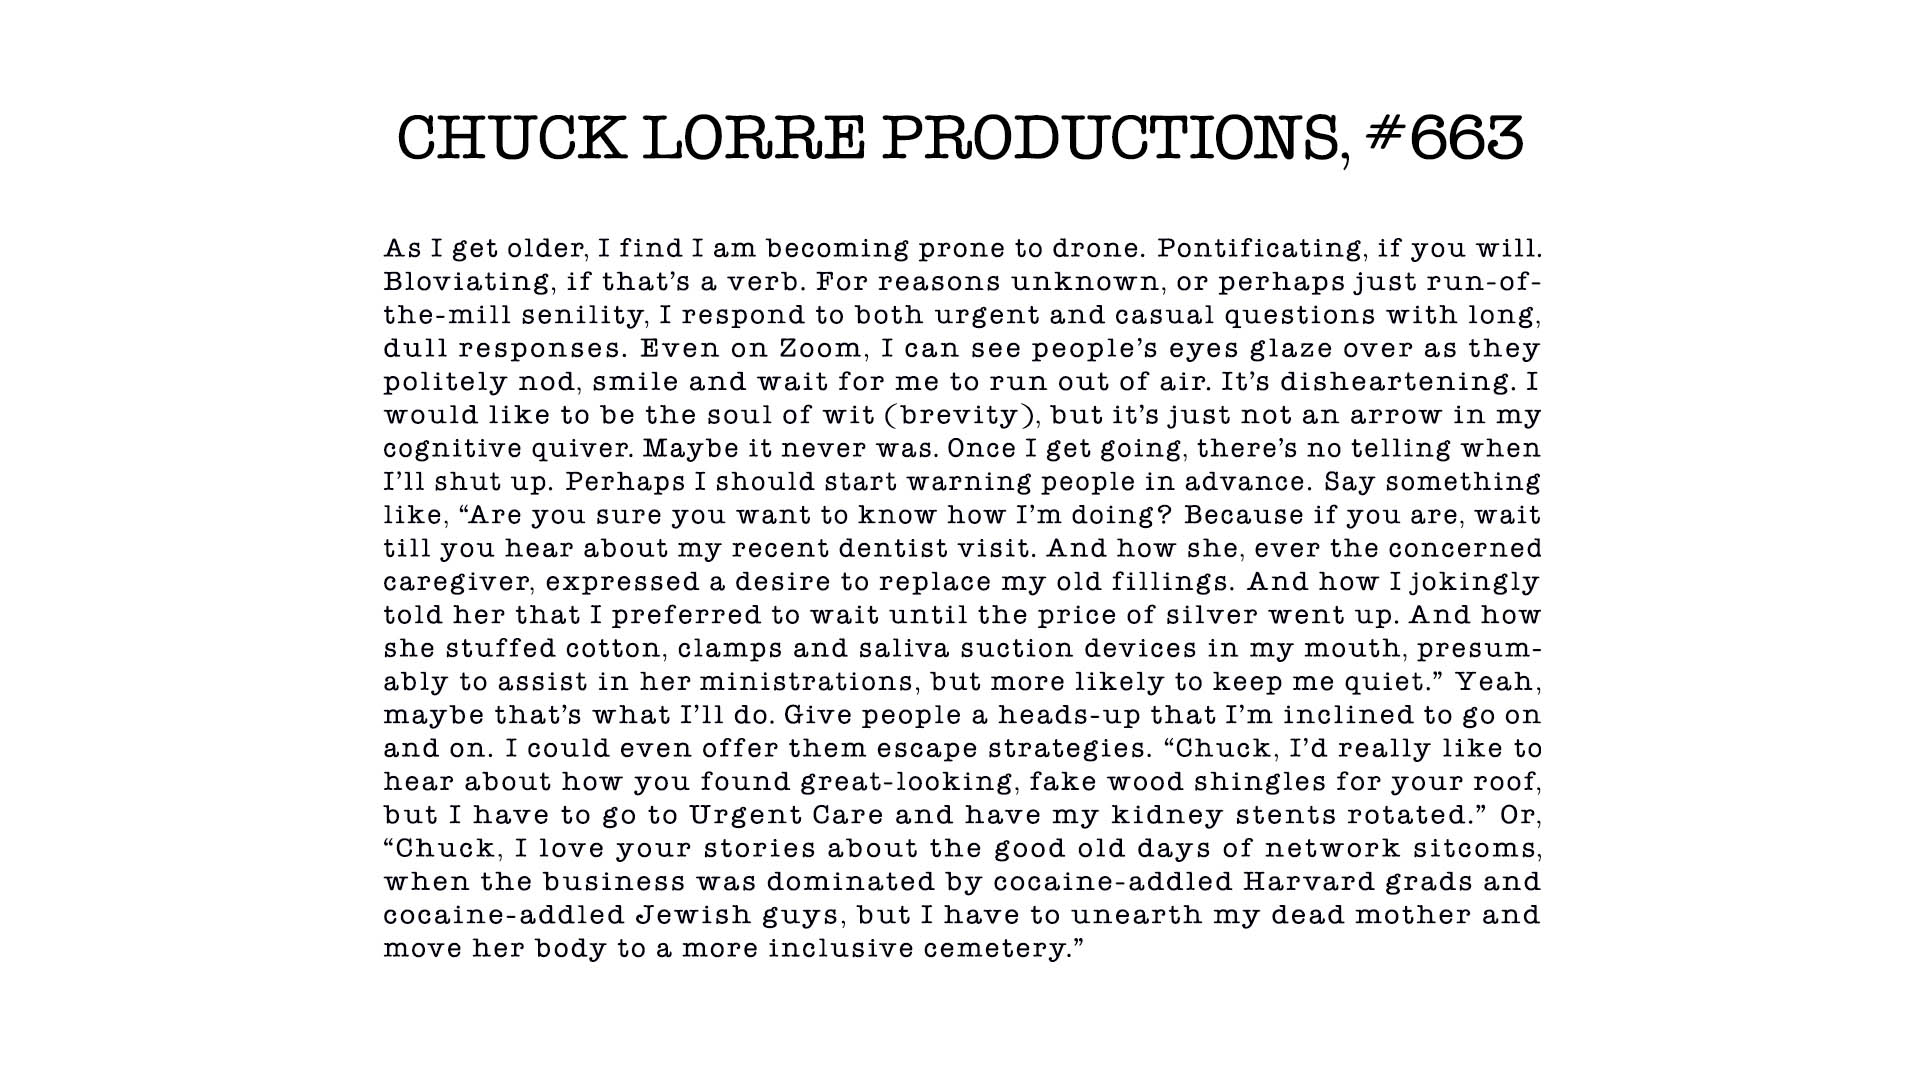 CHUCK LORRE PRODUCTIONS #663
As I get older, I find I am becoming prone to drone. Pontificat- ing, if you will. Bloviating, if that’s a verb. For reasons un- known, or perhaps just run-of-the-mill senility, I respond to both urgent and casual questions with long, dull responses. Even on Zoom, I can see people’s eyes glaze over as they politely nod, smile and wait for me to run out of air. It’s disheartening. I would like to be the soul of wit (brevity), but it’s just not an arrow in my cognitive quiver. Maybe it never was. Once I get go- ing, there’s no telling when I’ll shut up. Perhaps I should start warning people in advance. Say something like, “Are you sure you want to know how I’m doing? Because if you are, wait till you hear about my recent dentist visit. And how she, ever the concerned caregiver, expressed a desire to replace my old fillings. And how I jokingly told her that I preferred to wait until the price of silver went up. And how she stuffed cotton, clamps and saliva suc- tion devices in my mouth, presumably to assist in her ministra- tions, but more likely to keep me quiet.” Yeah, maybe that’s what I’ll do. Give people a heads-up that I’m inclined to go on and on. I could even offer them escape strategies. “Chuck, I’d really like to hear about how you found great-looking, fake wood shingles for your roof, but I have to go to Urgent Care and have my kidney stents rotated.” Or, “Chuck, I love your stories about the good old days of network sitcoms, when the business was dominated by co- caine-addled Harvard grads and cocaine-addled Jewish guys, but I have to unearth my dead mother and move her body to a more inclu- sive cemetery.”